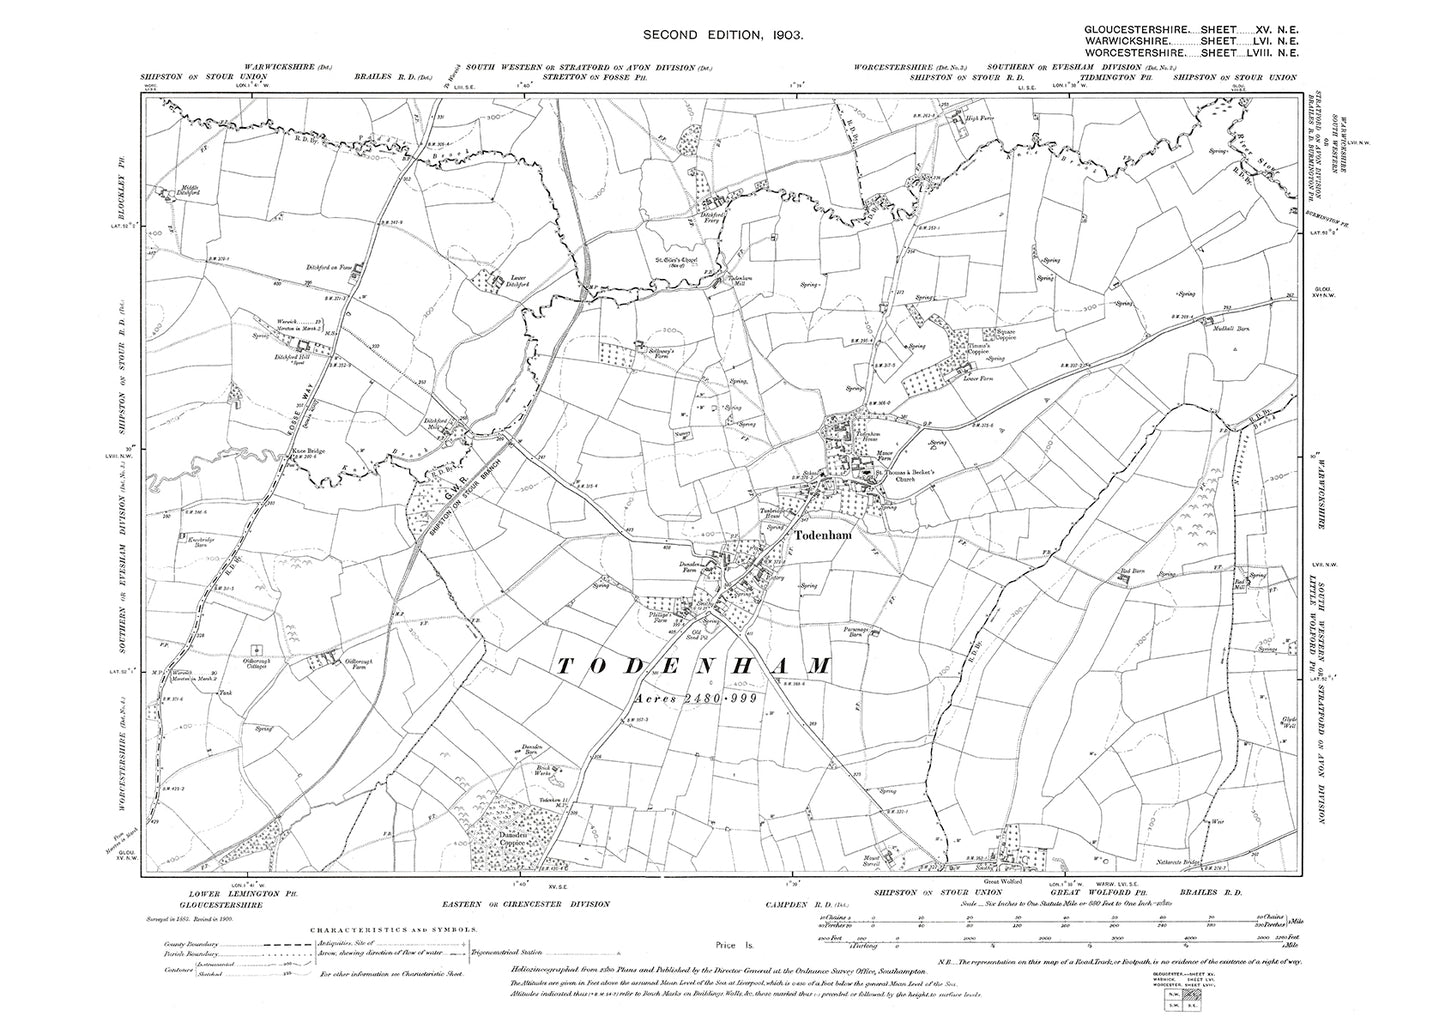 Old OS map dated 1903, showing Todenham in Gloucestershire - 15NE